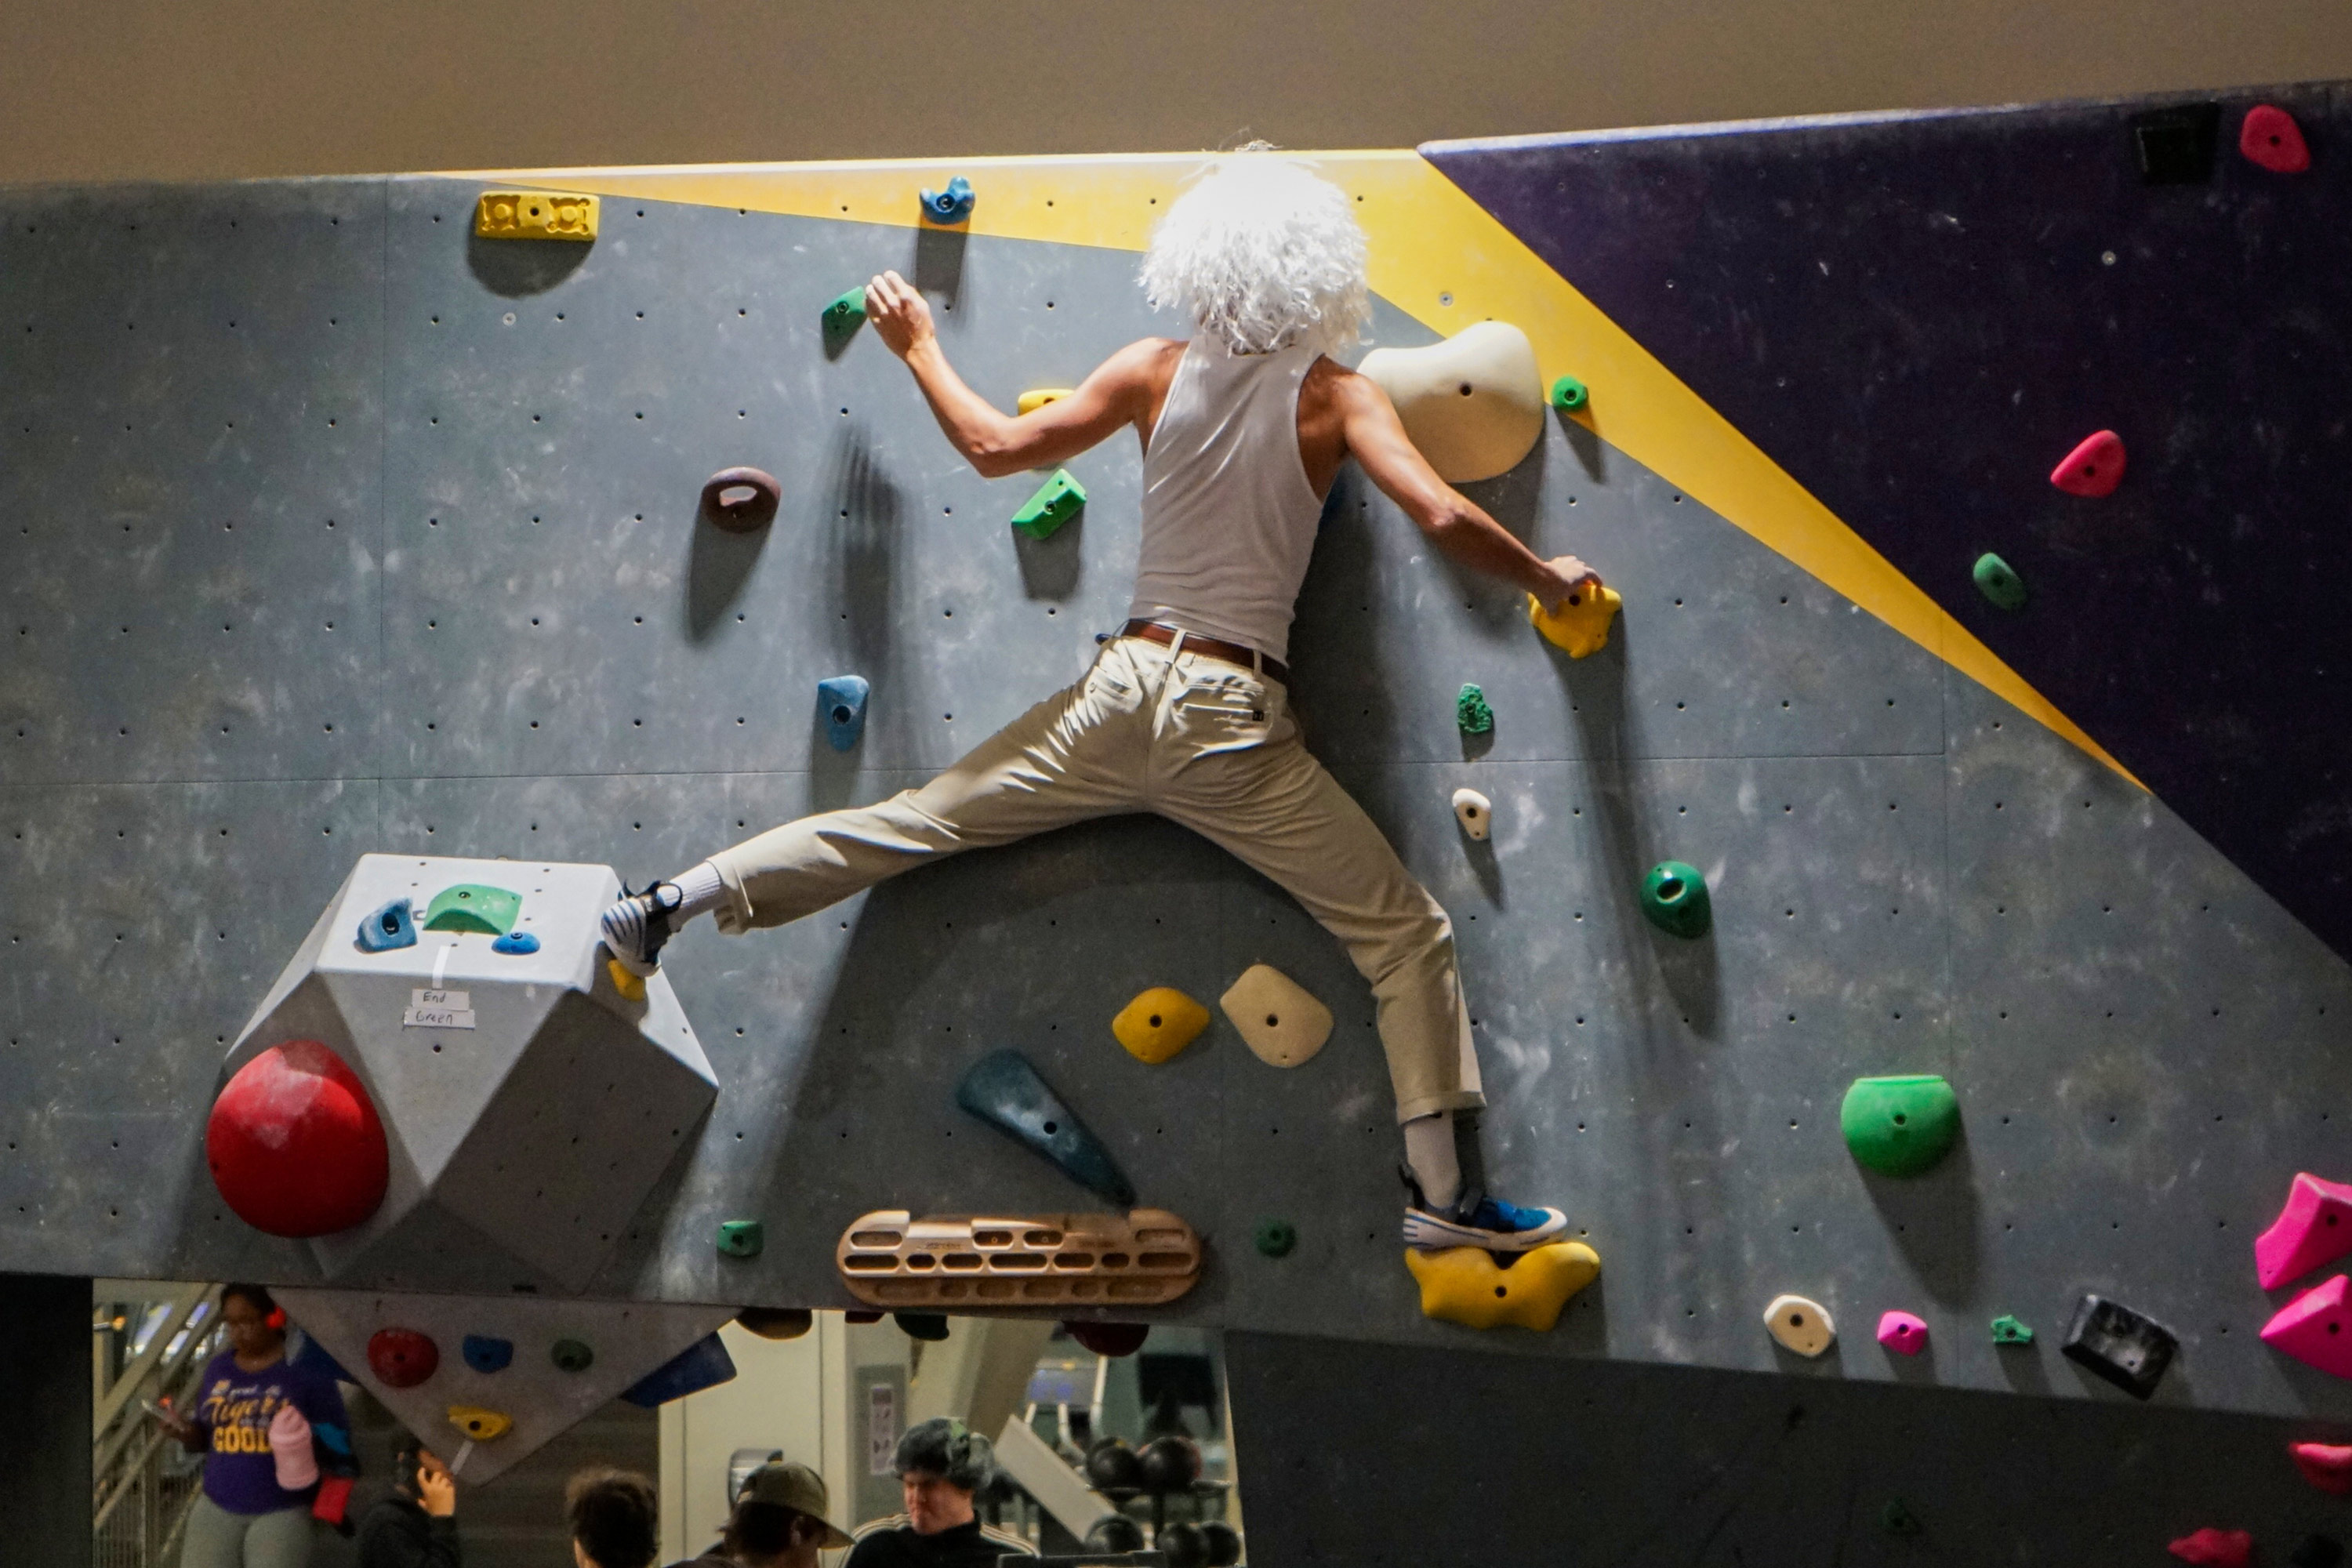 climber on the bouldering wall